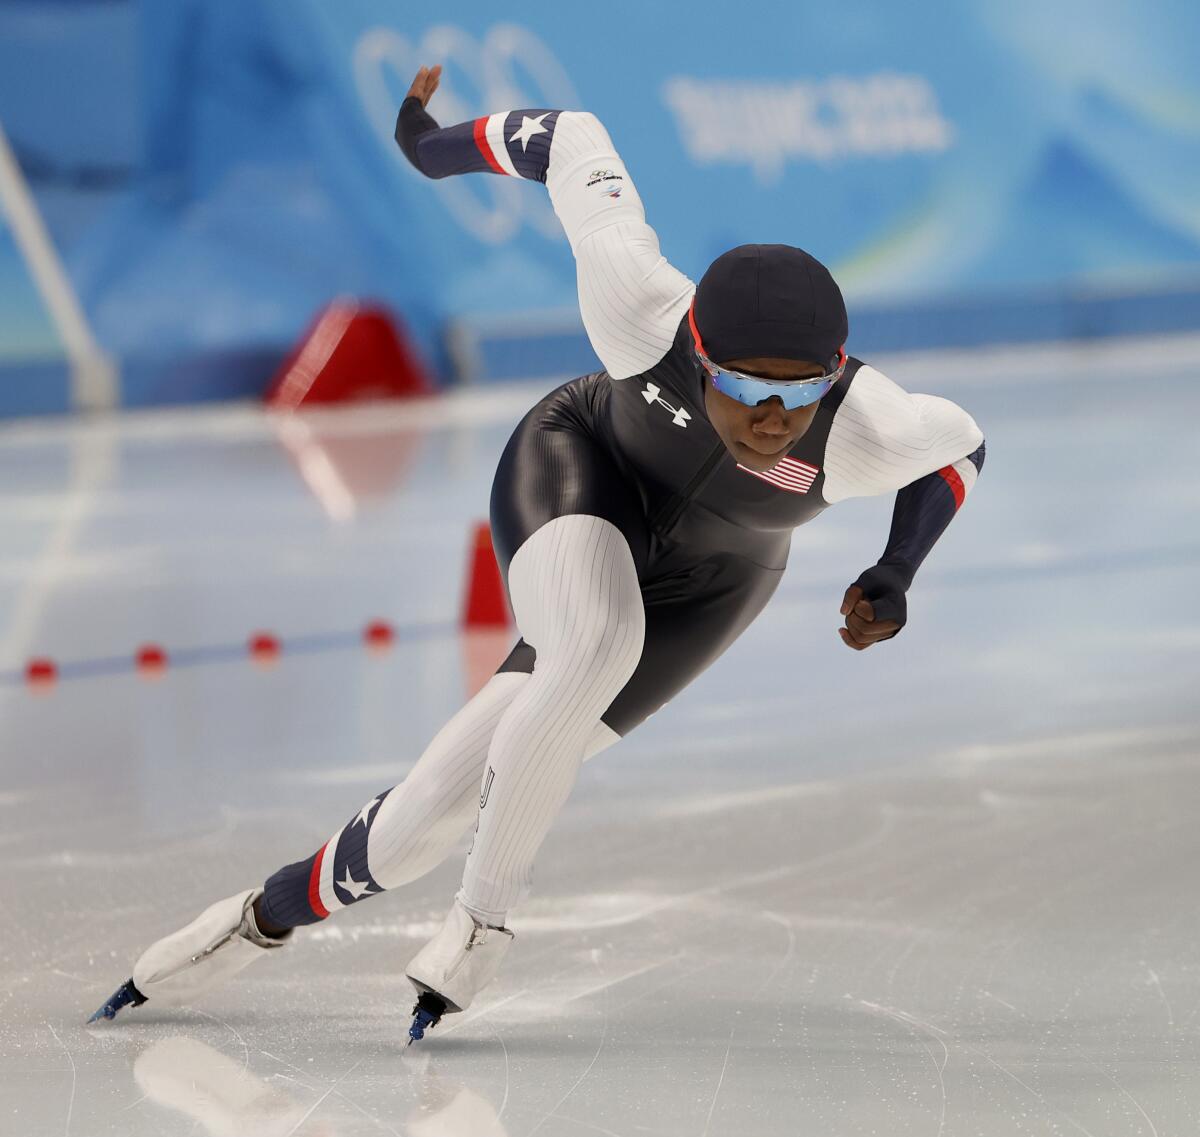 Golden moment: Erin Jackson becomes first Black woman to medal in  speedskating at Olympics